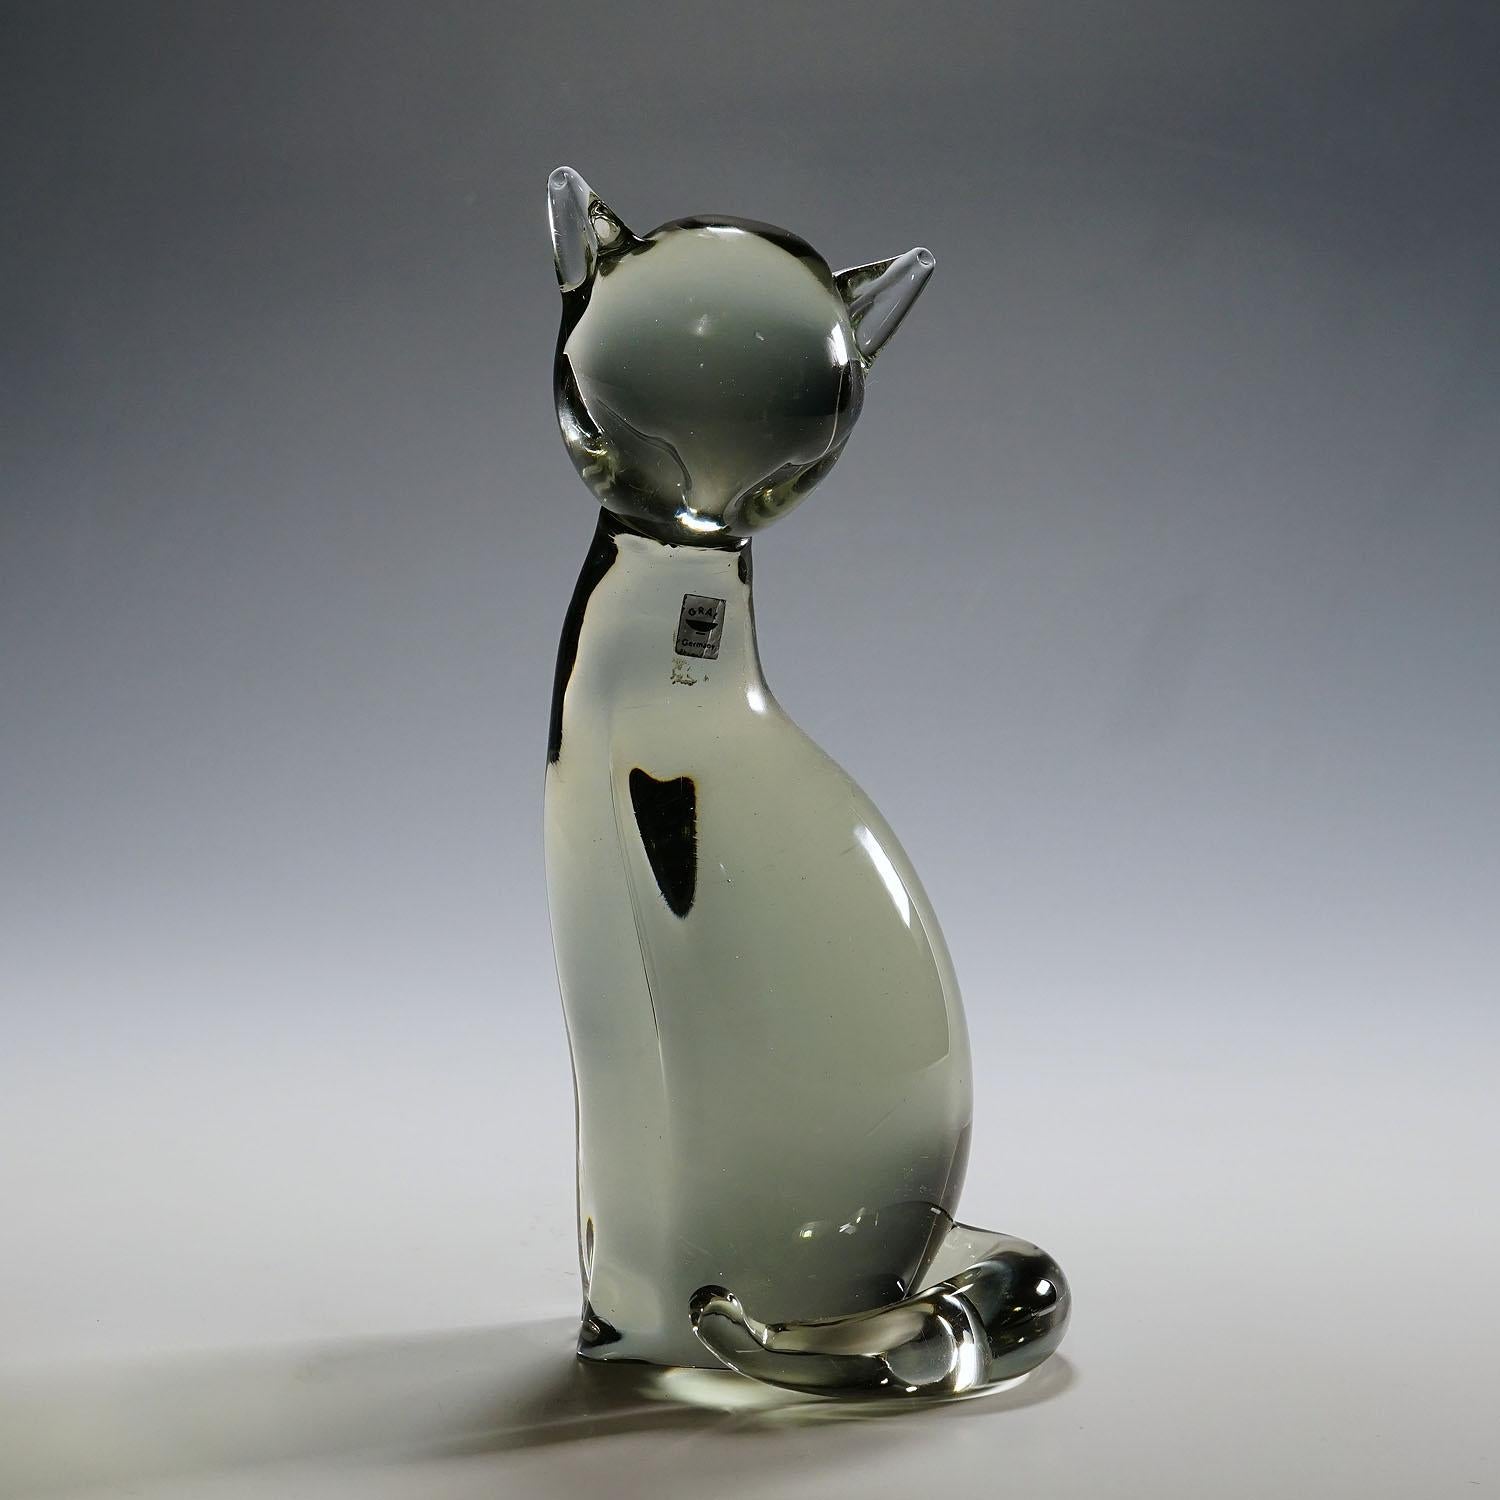 Sculpture of a stylized cat designed by Livio Seguso, circa 1970s.

A cute sculpture of a stylized cat in smoke grey crystal glass. Handmade in the Gral glass manufactory, Germany. It was designed by Livio Seguso circa 1970. The body is with factory